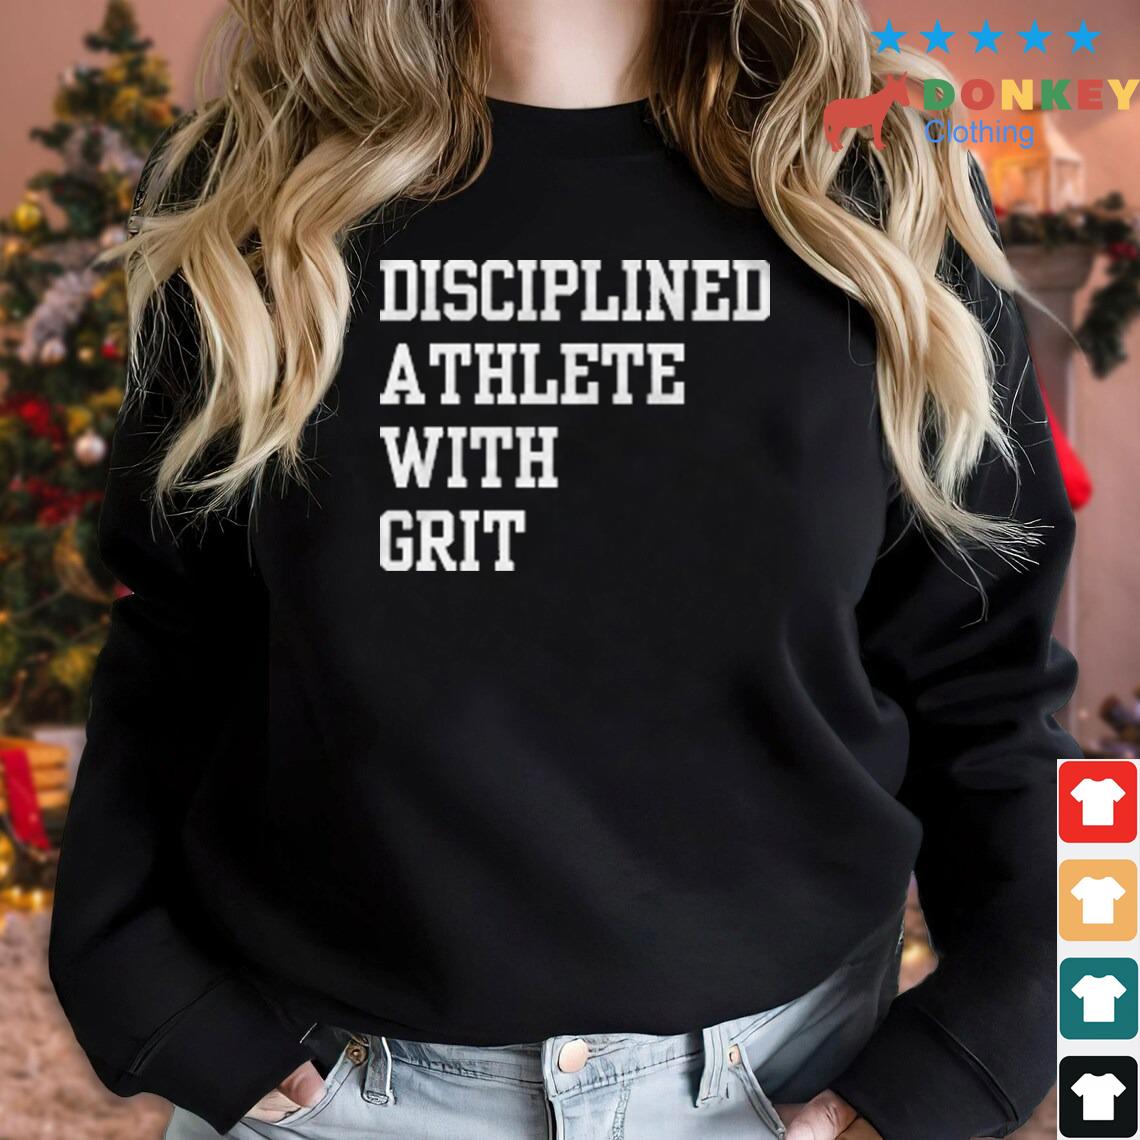 Dawg Disciplined Athlete With Grit Shirt